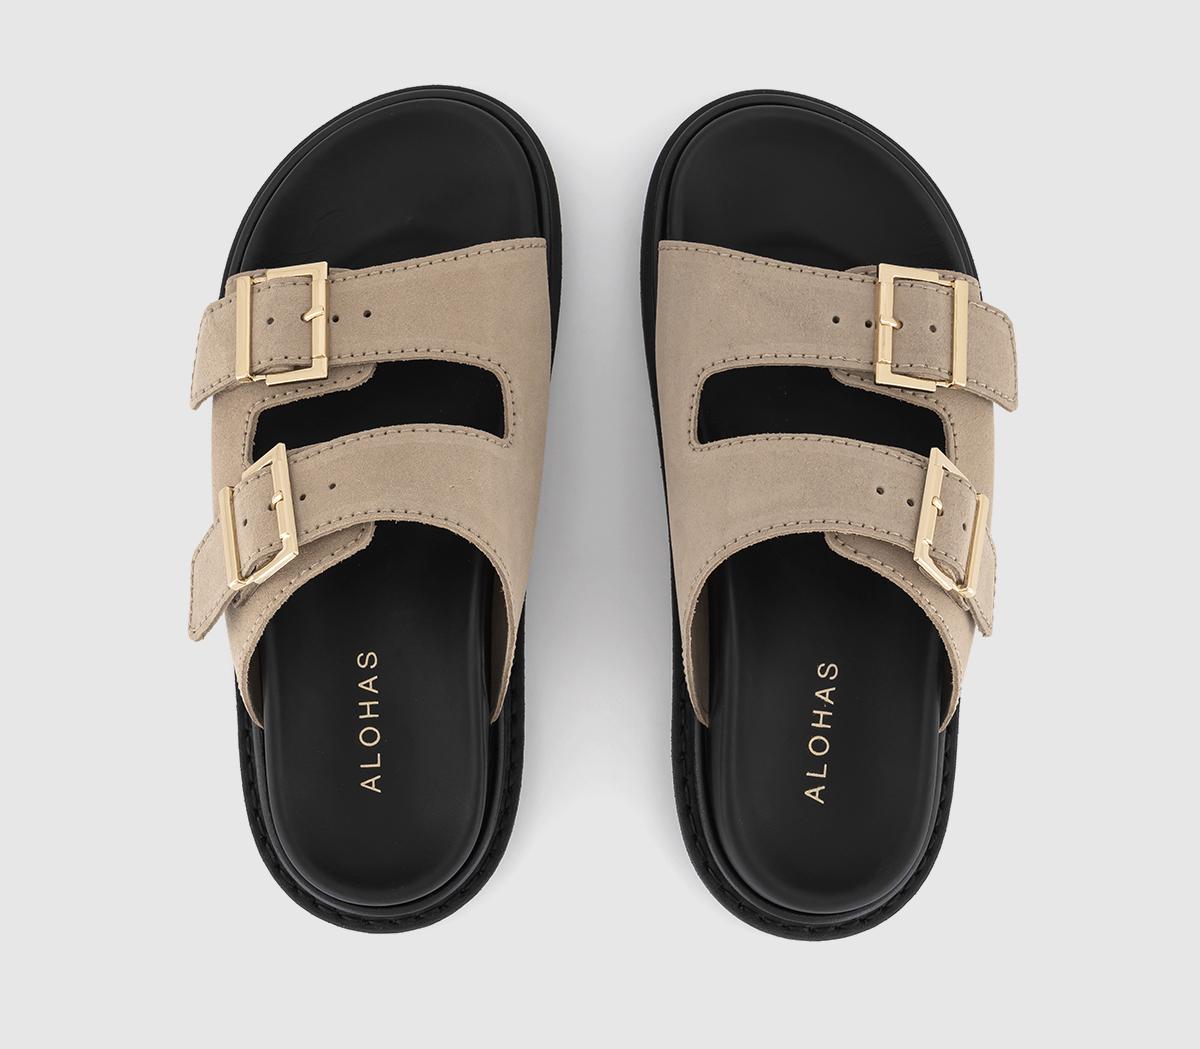 ALOHAS Buckle Strap Sandals Taupe - Women’s Sandals